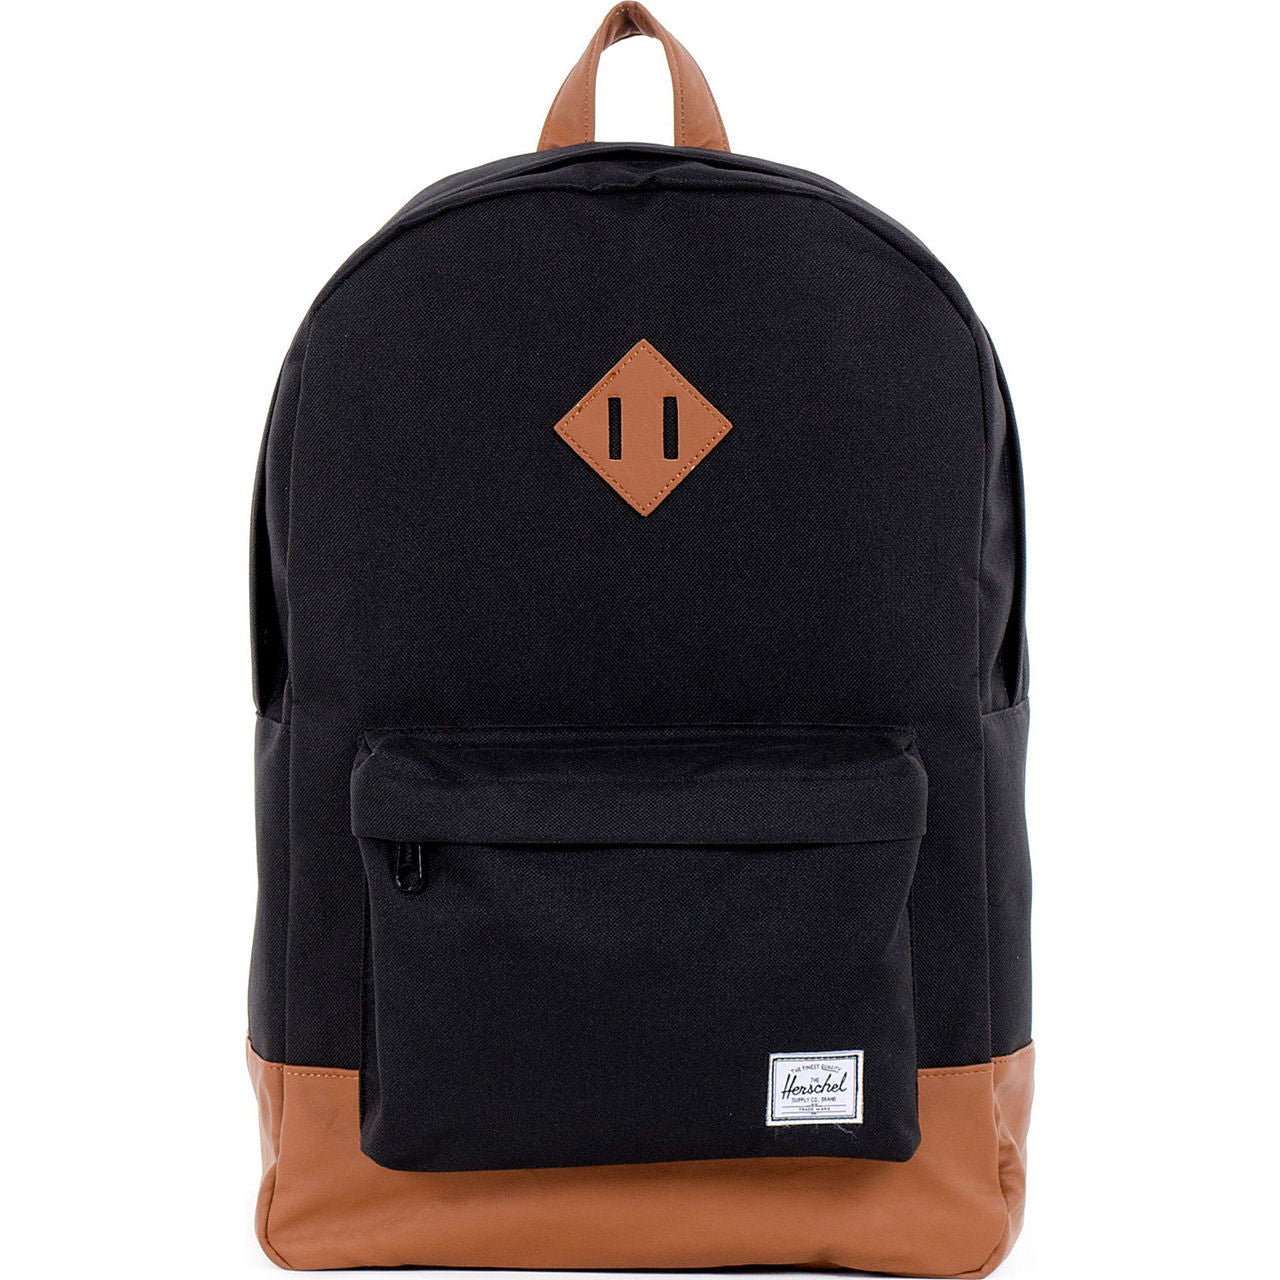 Herschel Supply Co. - Heritage Backpack, Black - The Giant Peach